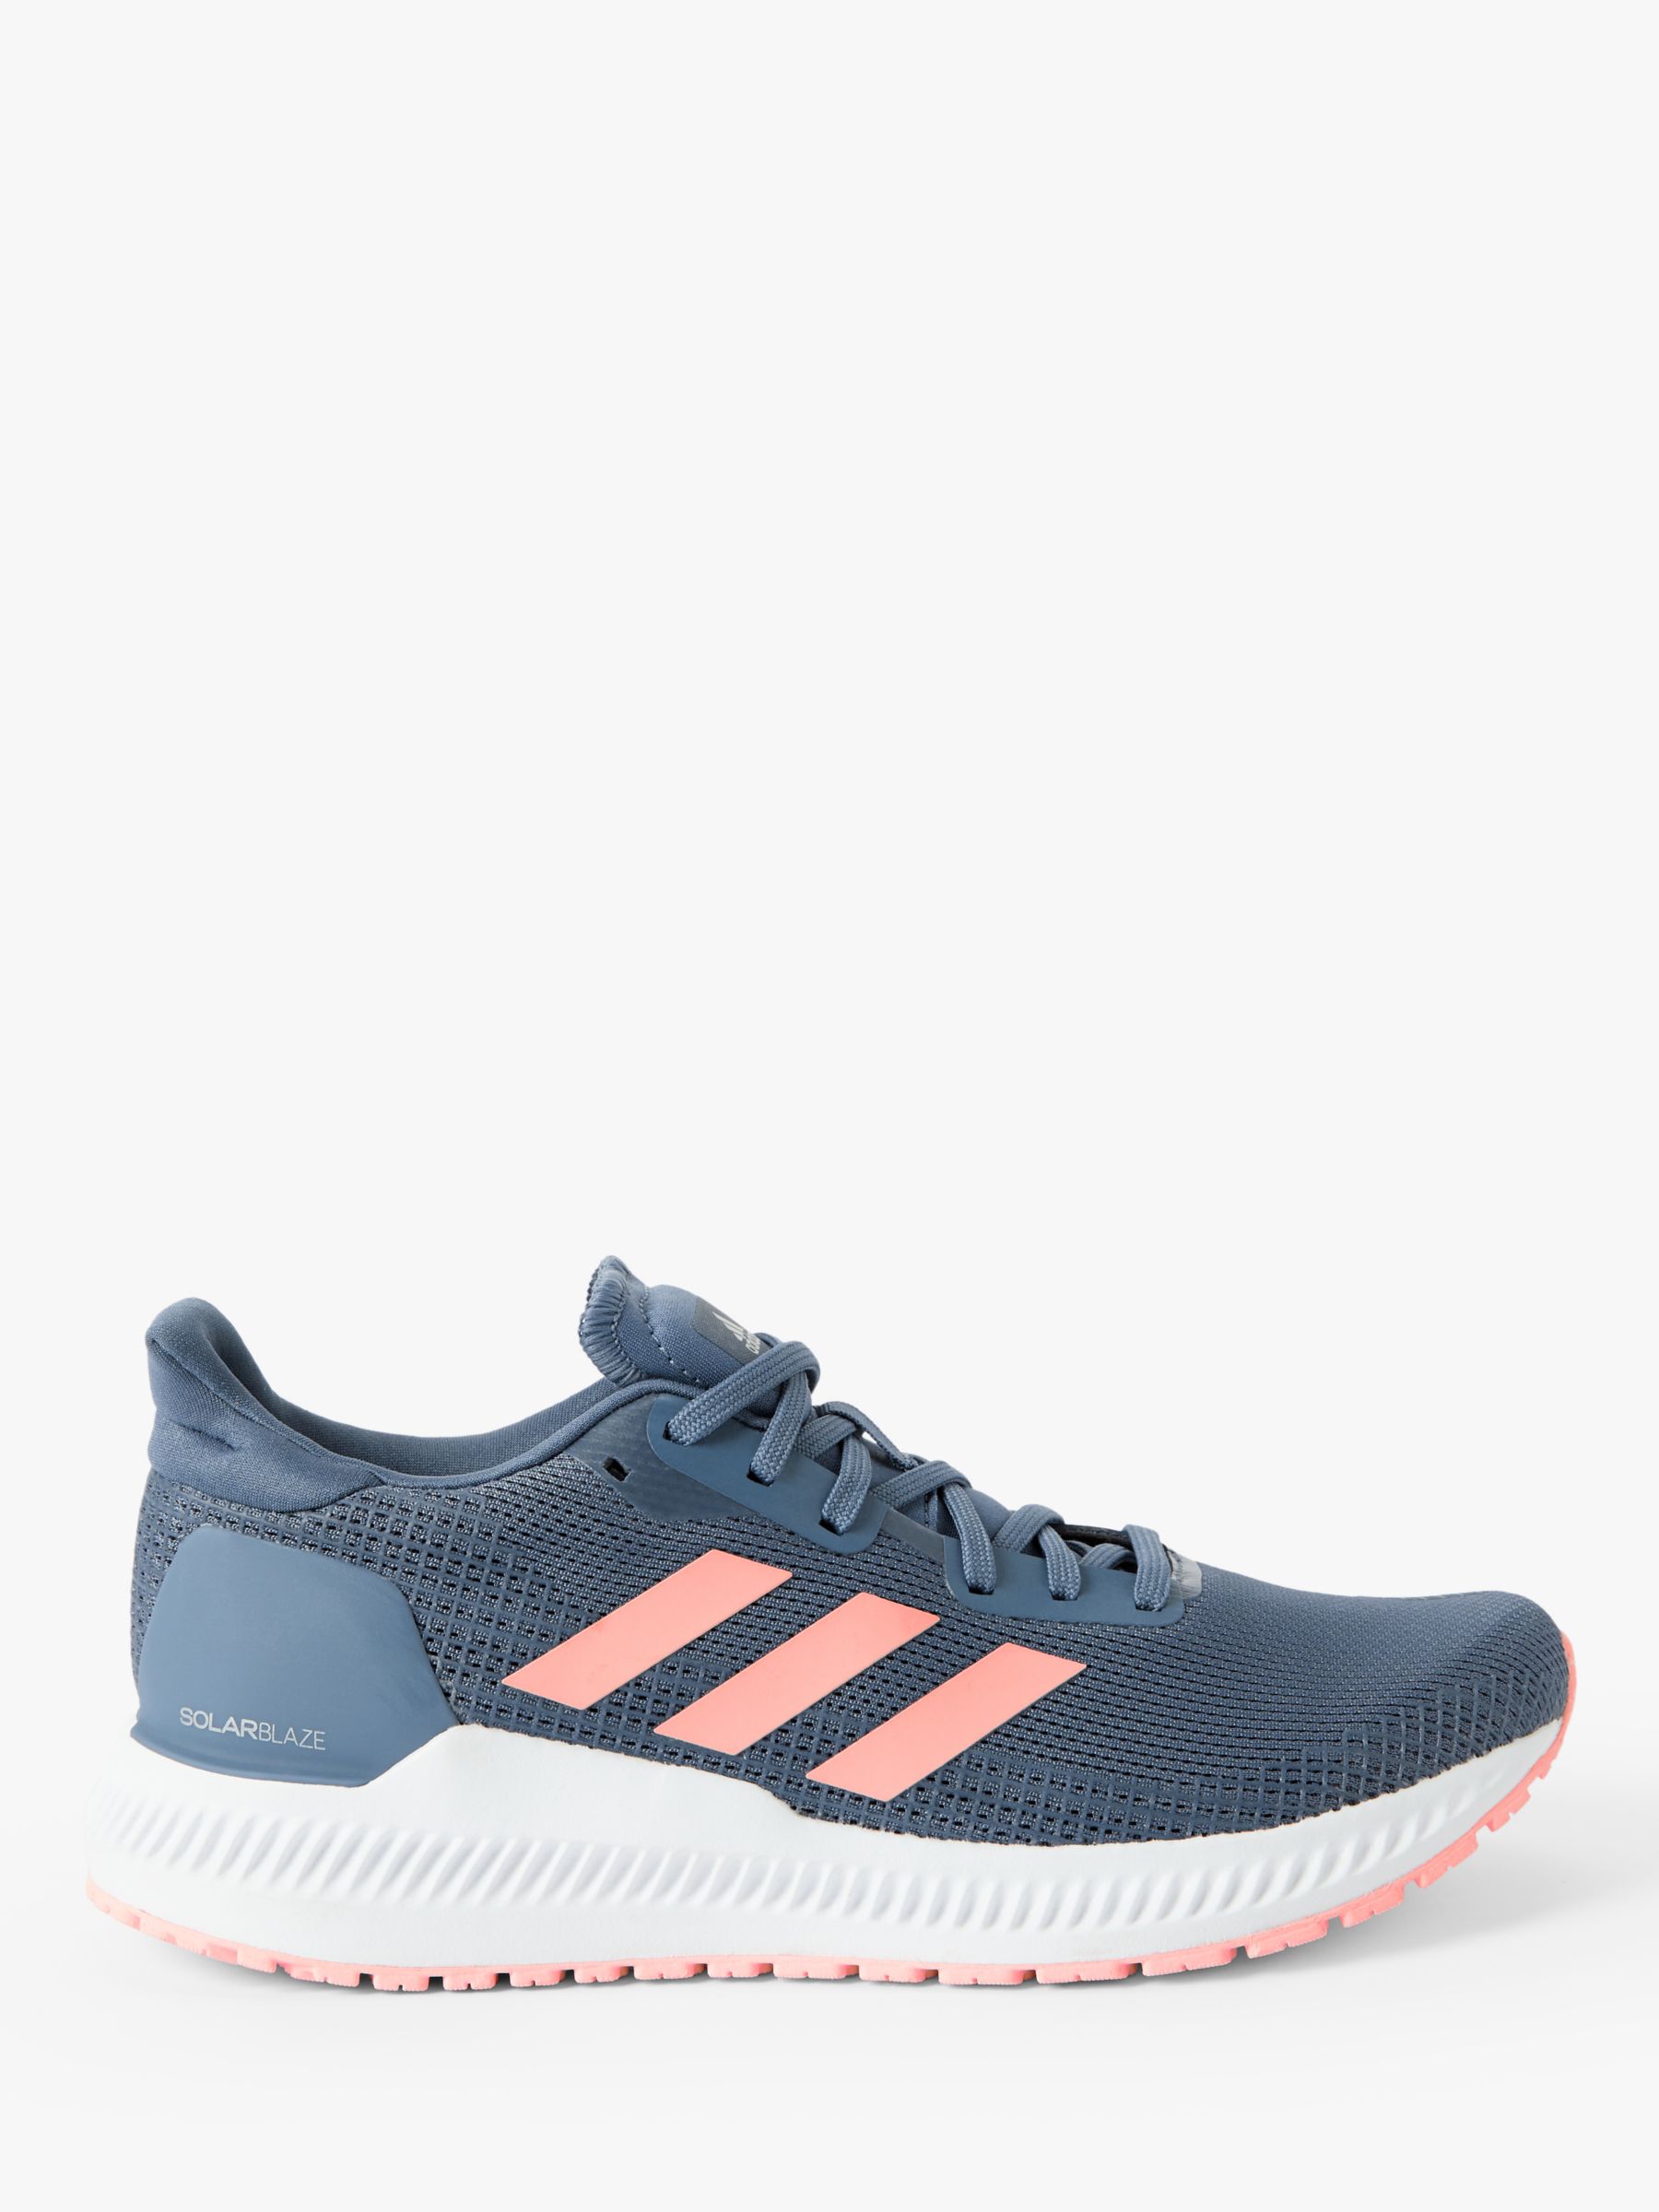 adidas navy and pink trainers